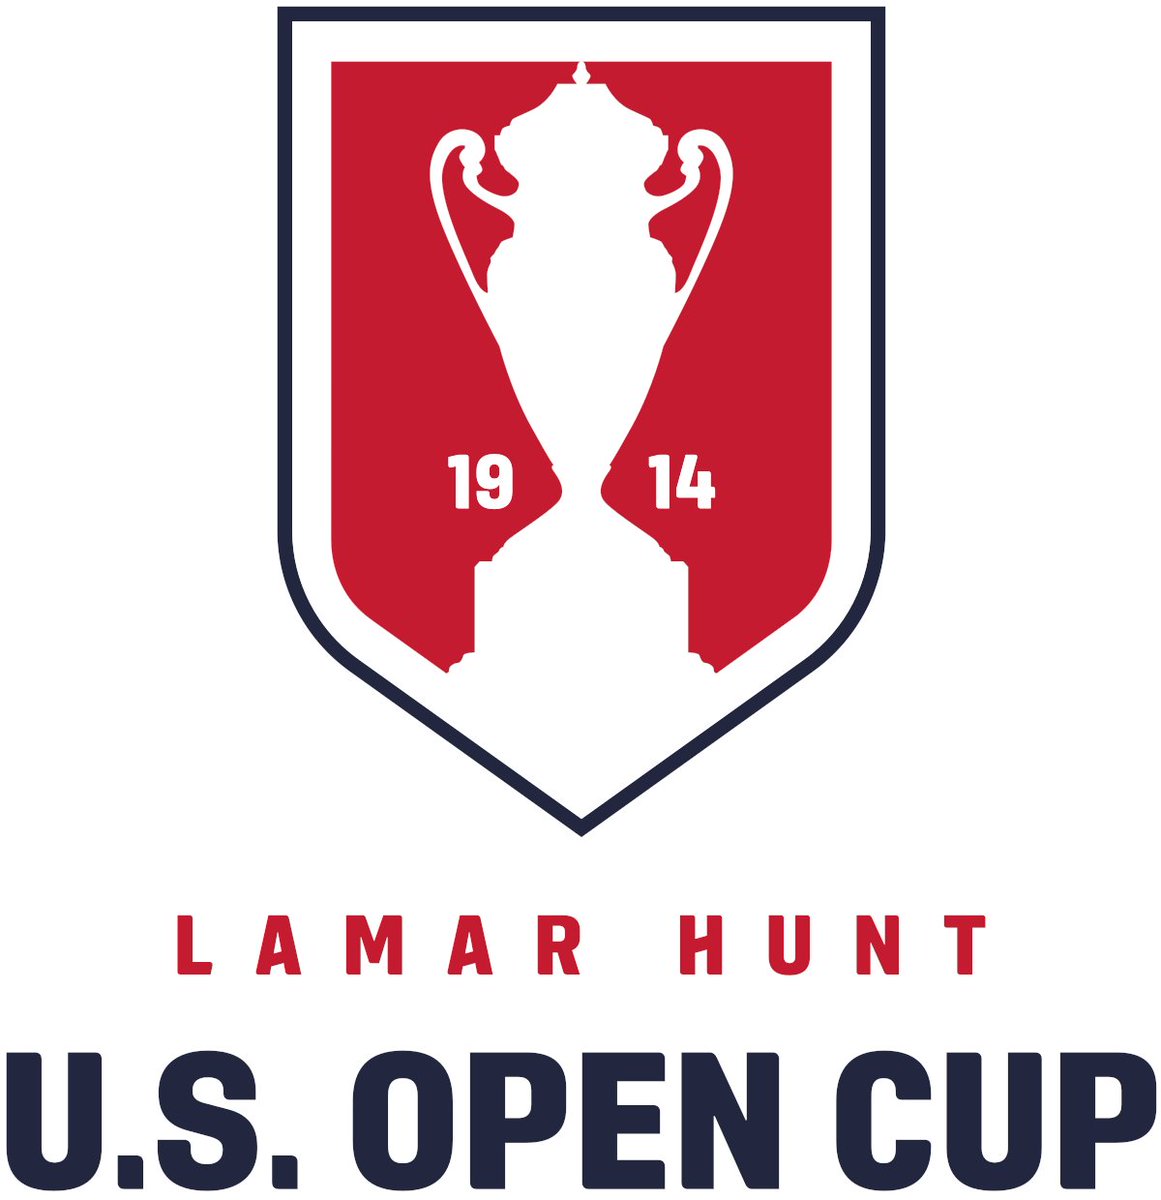 Congratulations to all @USAdultSoccer teams who qualified for the 1st round of the @usopencup. 4 teams will face @USLLeagueOne, 5 teams will face @NISALeague, and 3 teams will face @MLSNEXTPRO. Official schedule will come out tomorrow with the 1st game kicking off on Mar.19th.